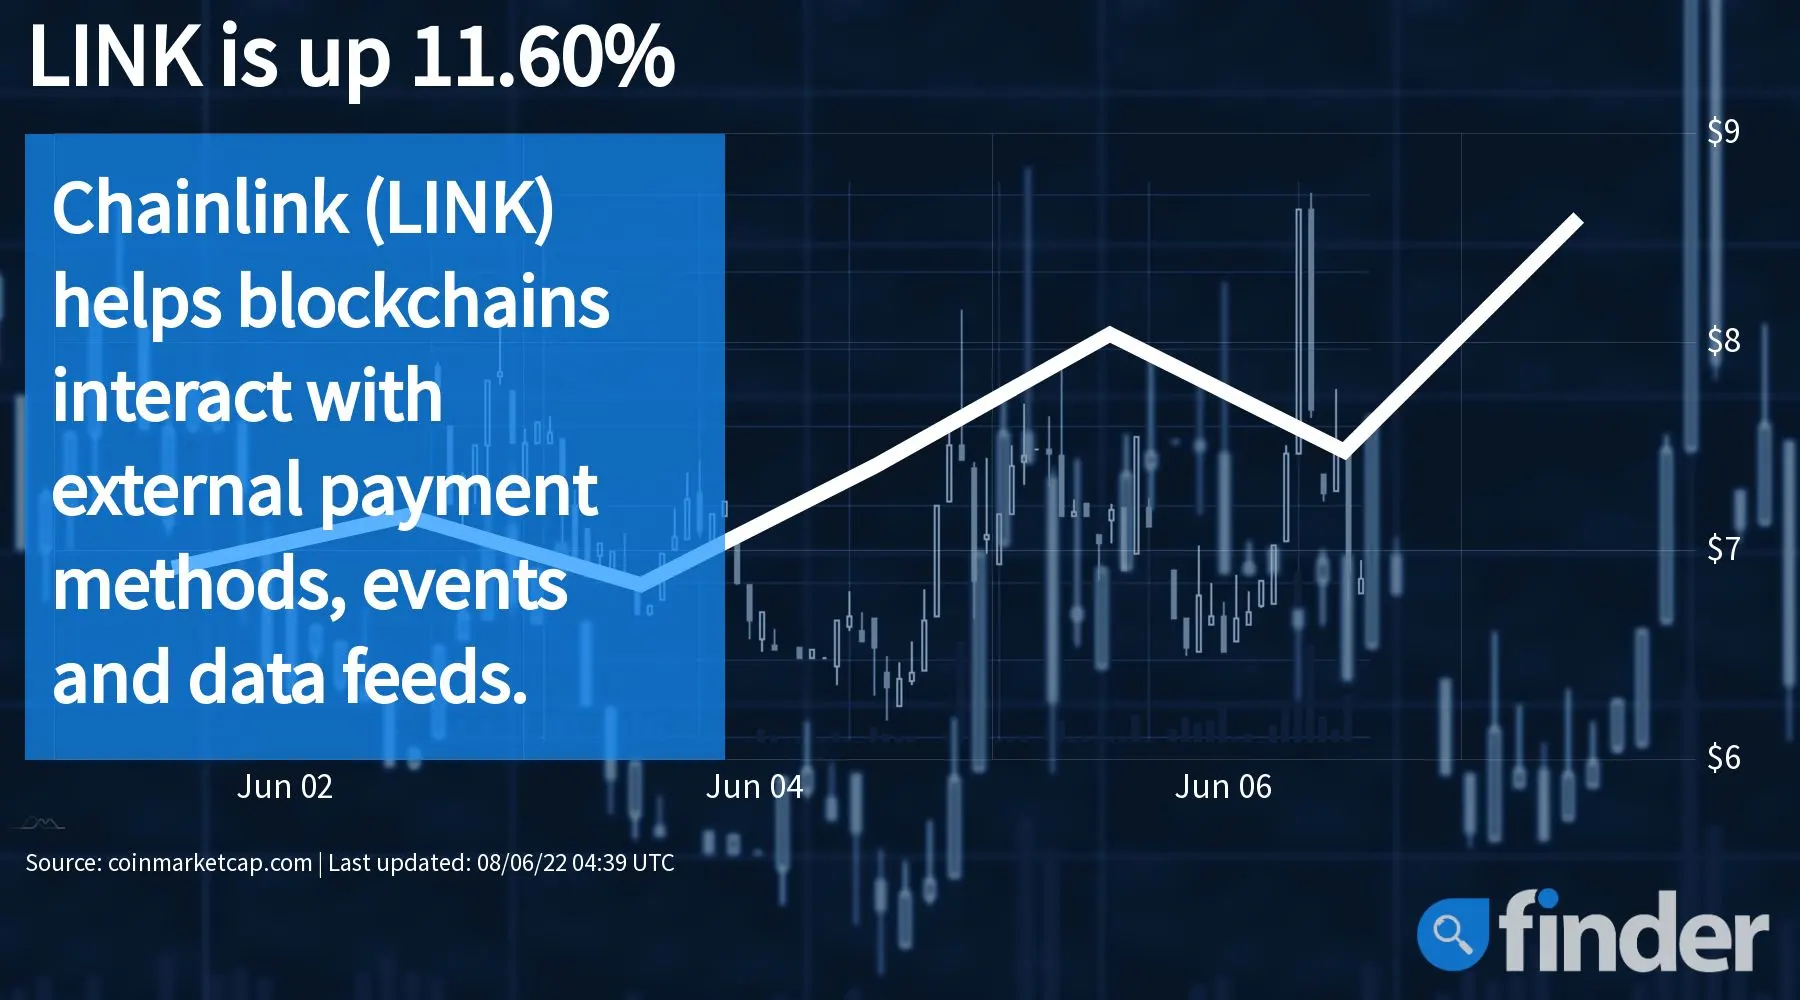 høj mixer noget Today's crypto movers: Bitcoin (↑3.20%), Ethereum (↑2.64%), Internet  Computer (↓4.38%) and Chainlink (↑11.60%) | finder.com